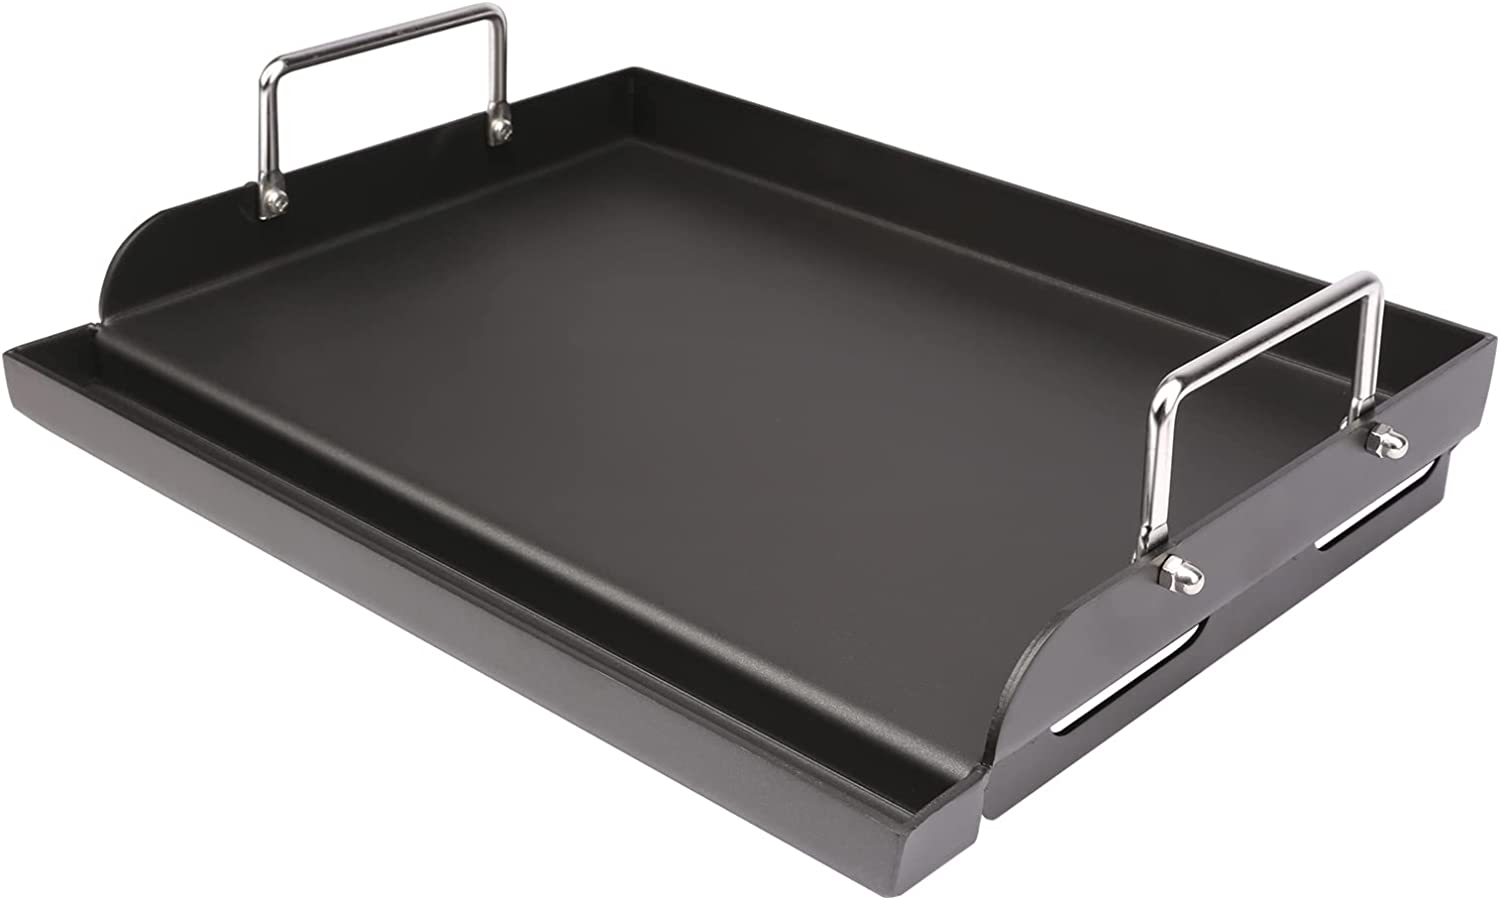 Flat Top Griddle for Stovetop, Non-Stick Griddle Grill Pan, Stove Top